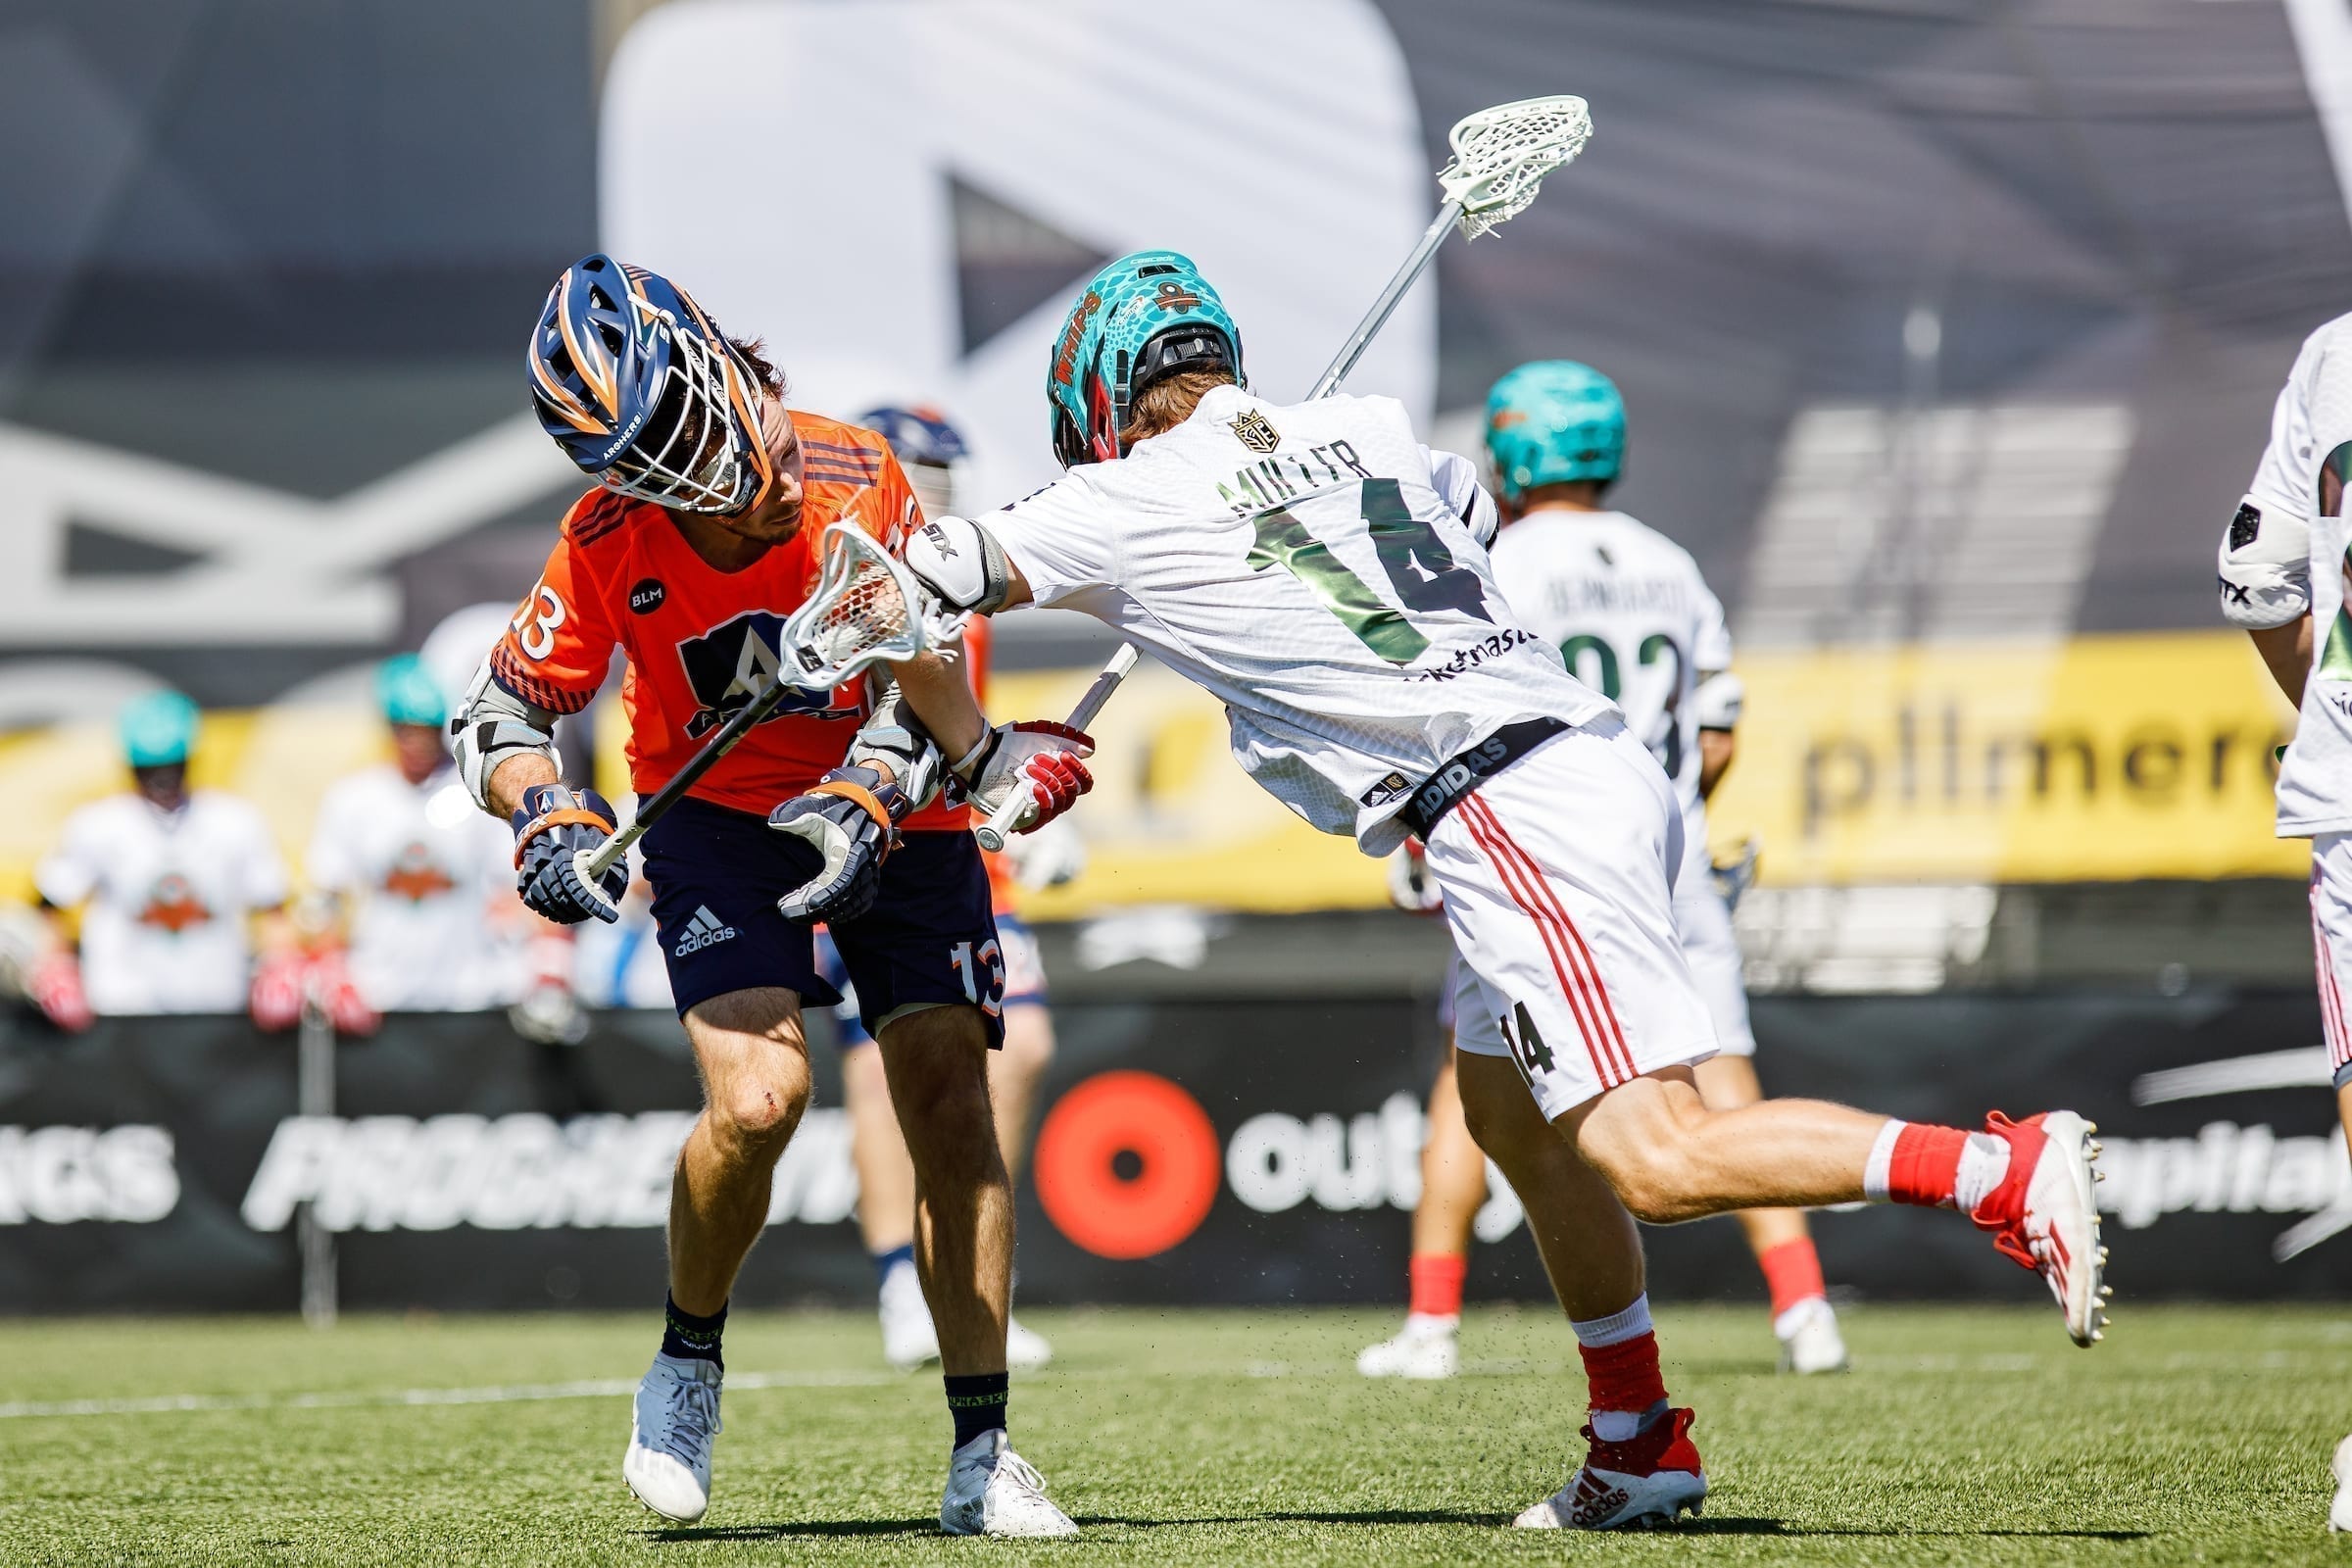 Timmy Muller Means Everything to Whipsnakes Staff, Teammates Premier Lacrosse League